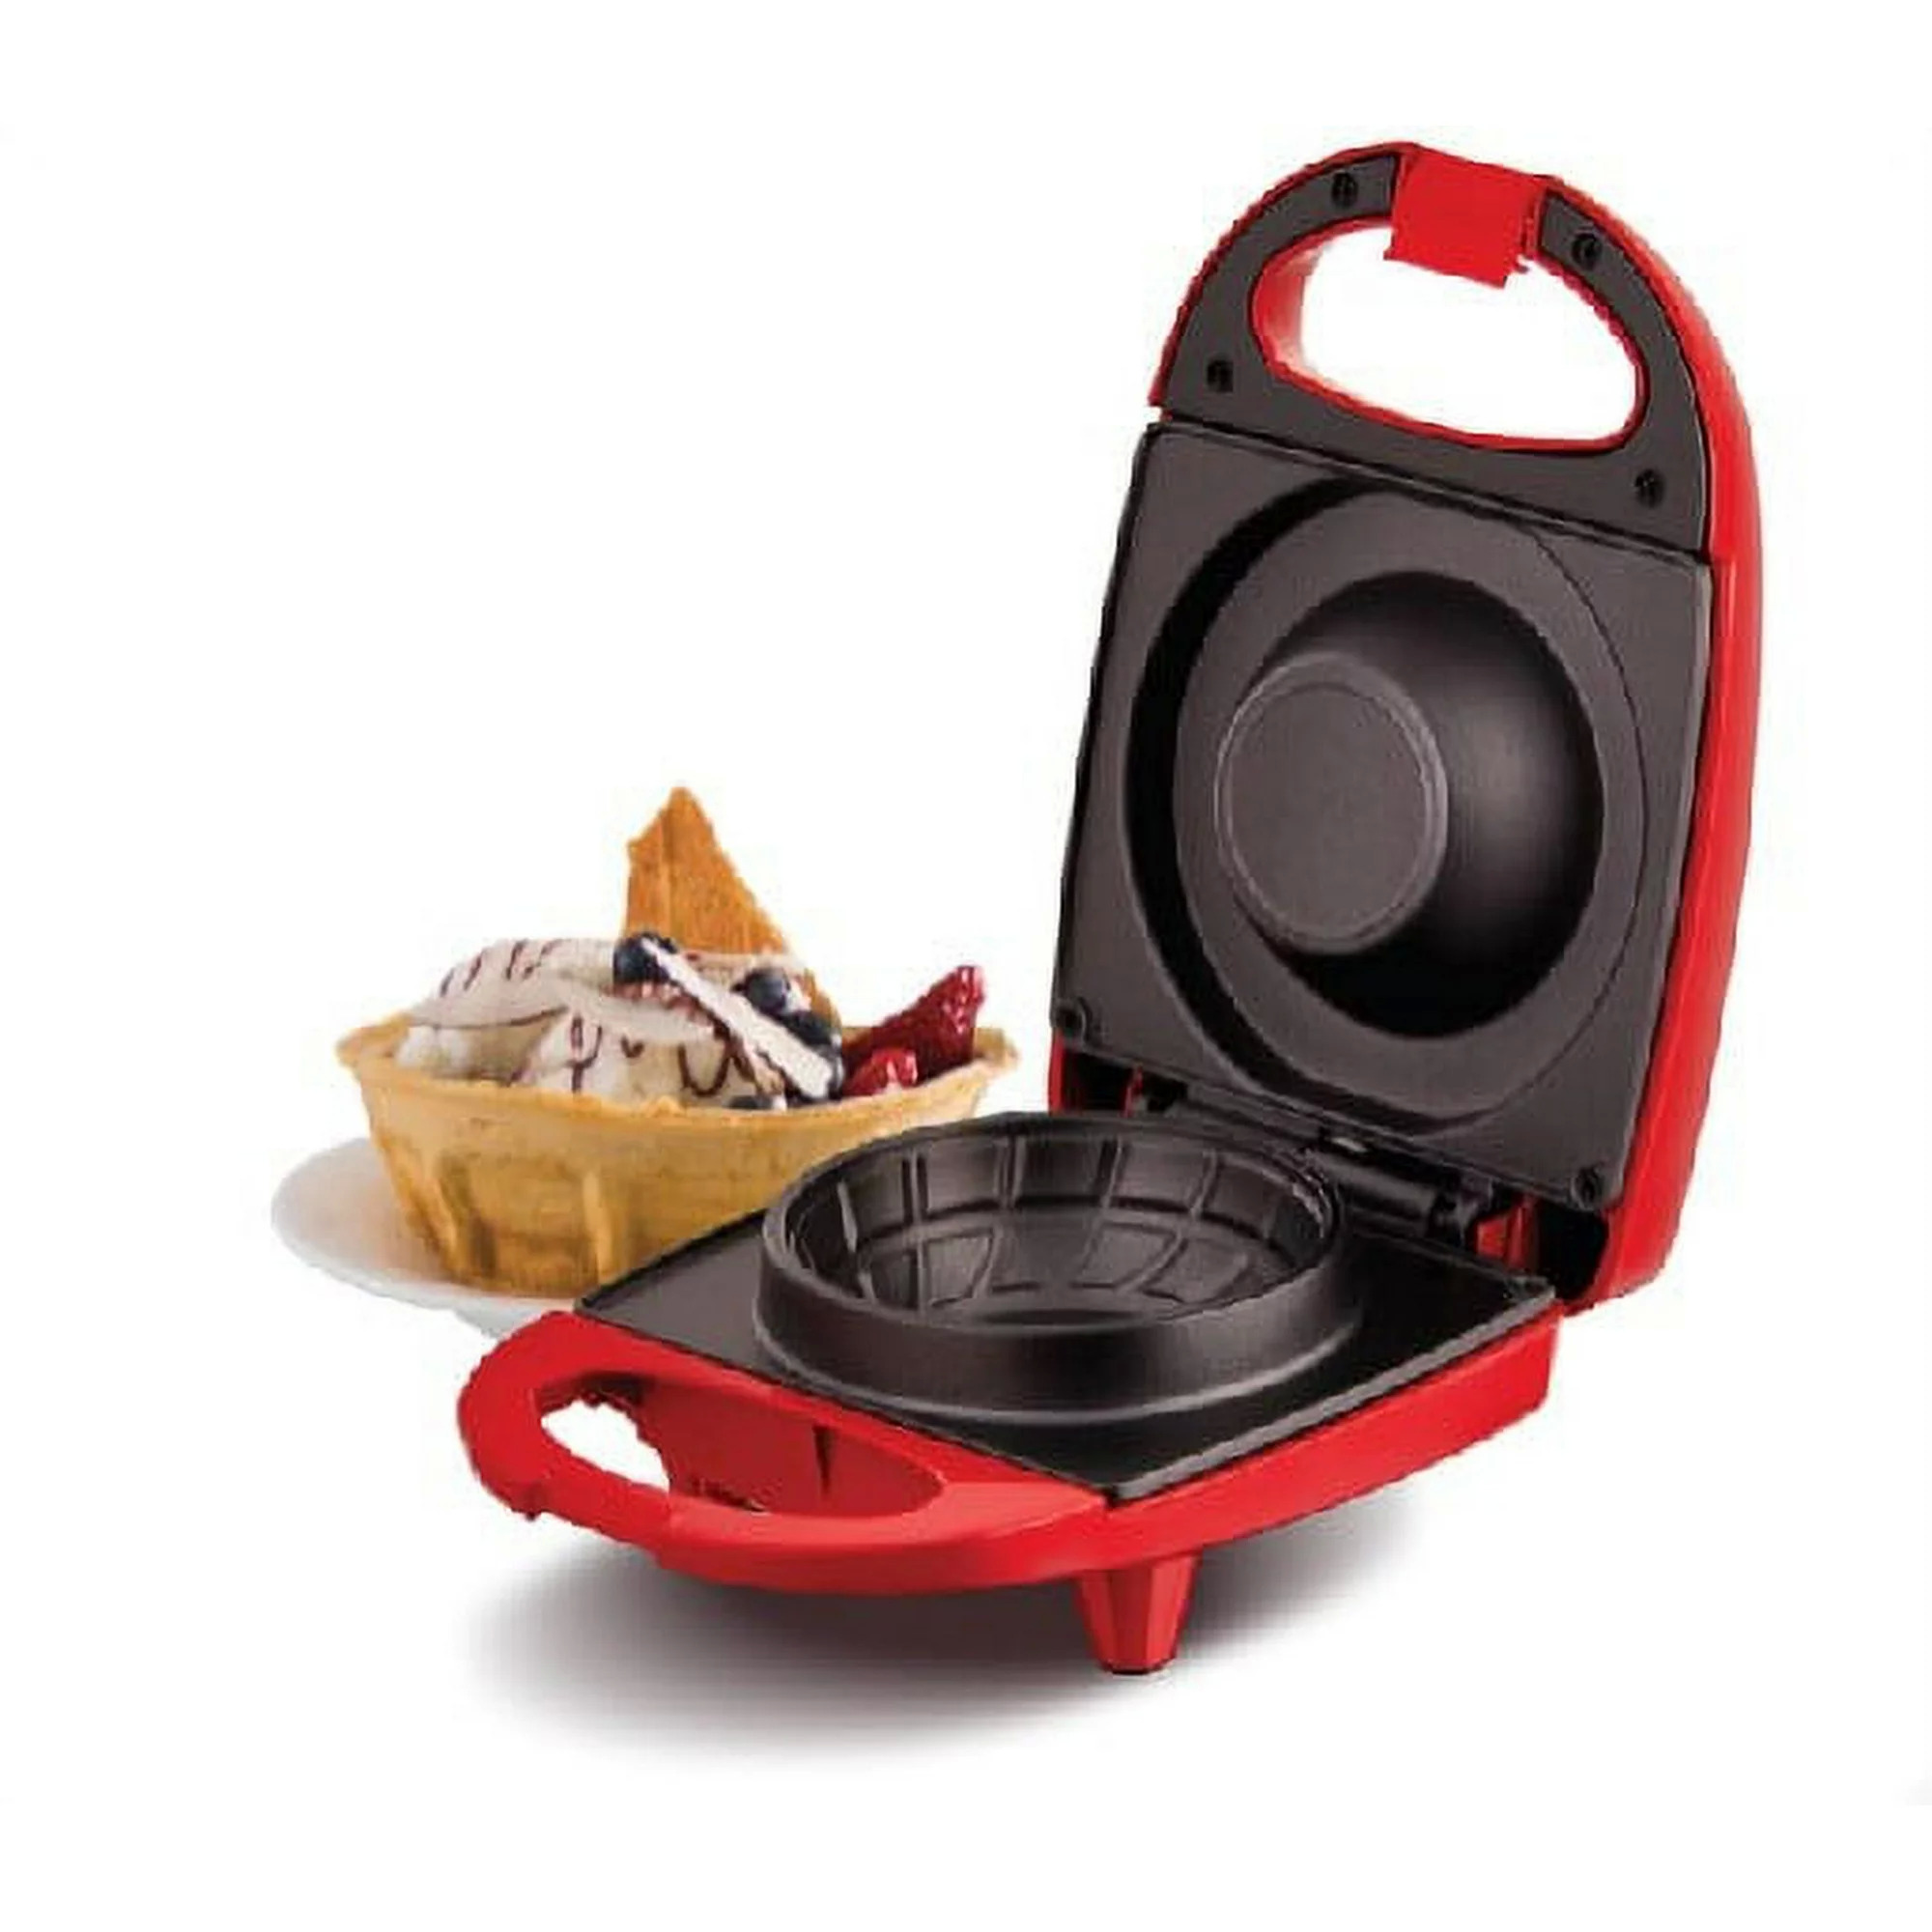 Rise By Dash 4.4” Mini Waffle Bowl Maker (Red) $7.20 + Free Shipping w/ Walmart+ or $35+